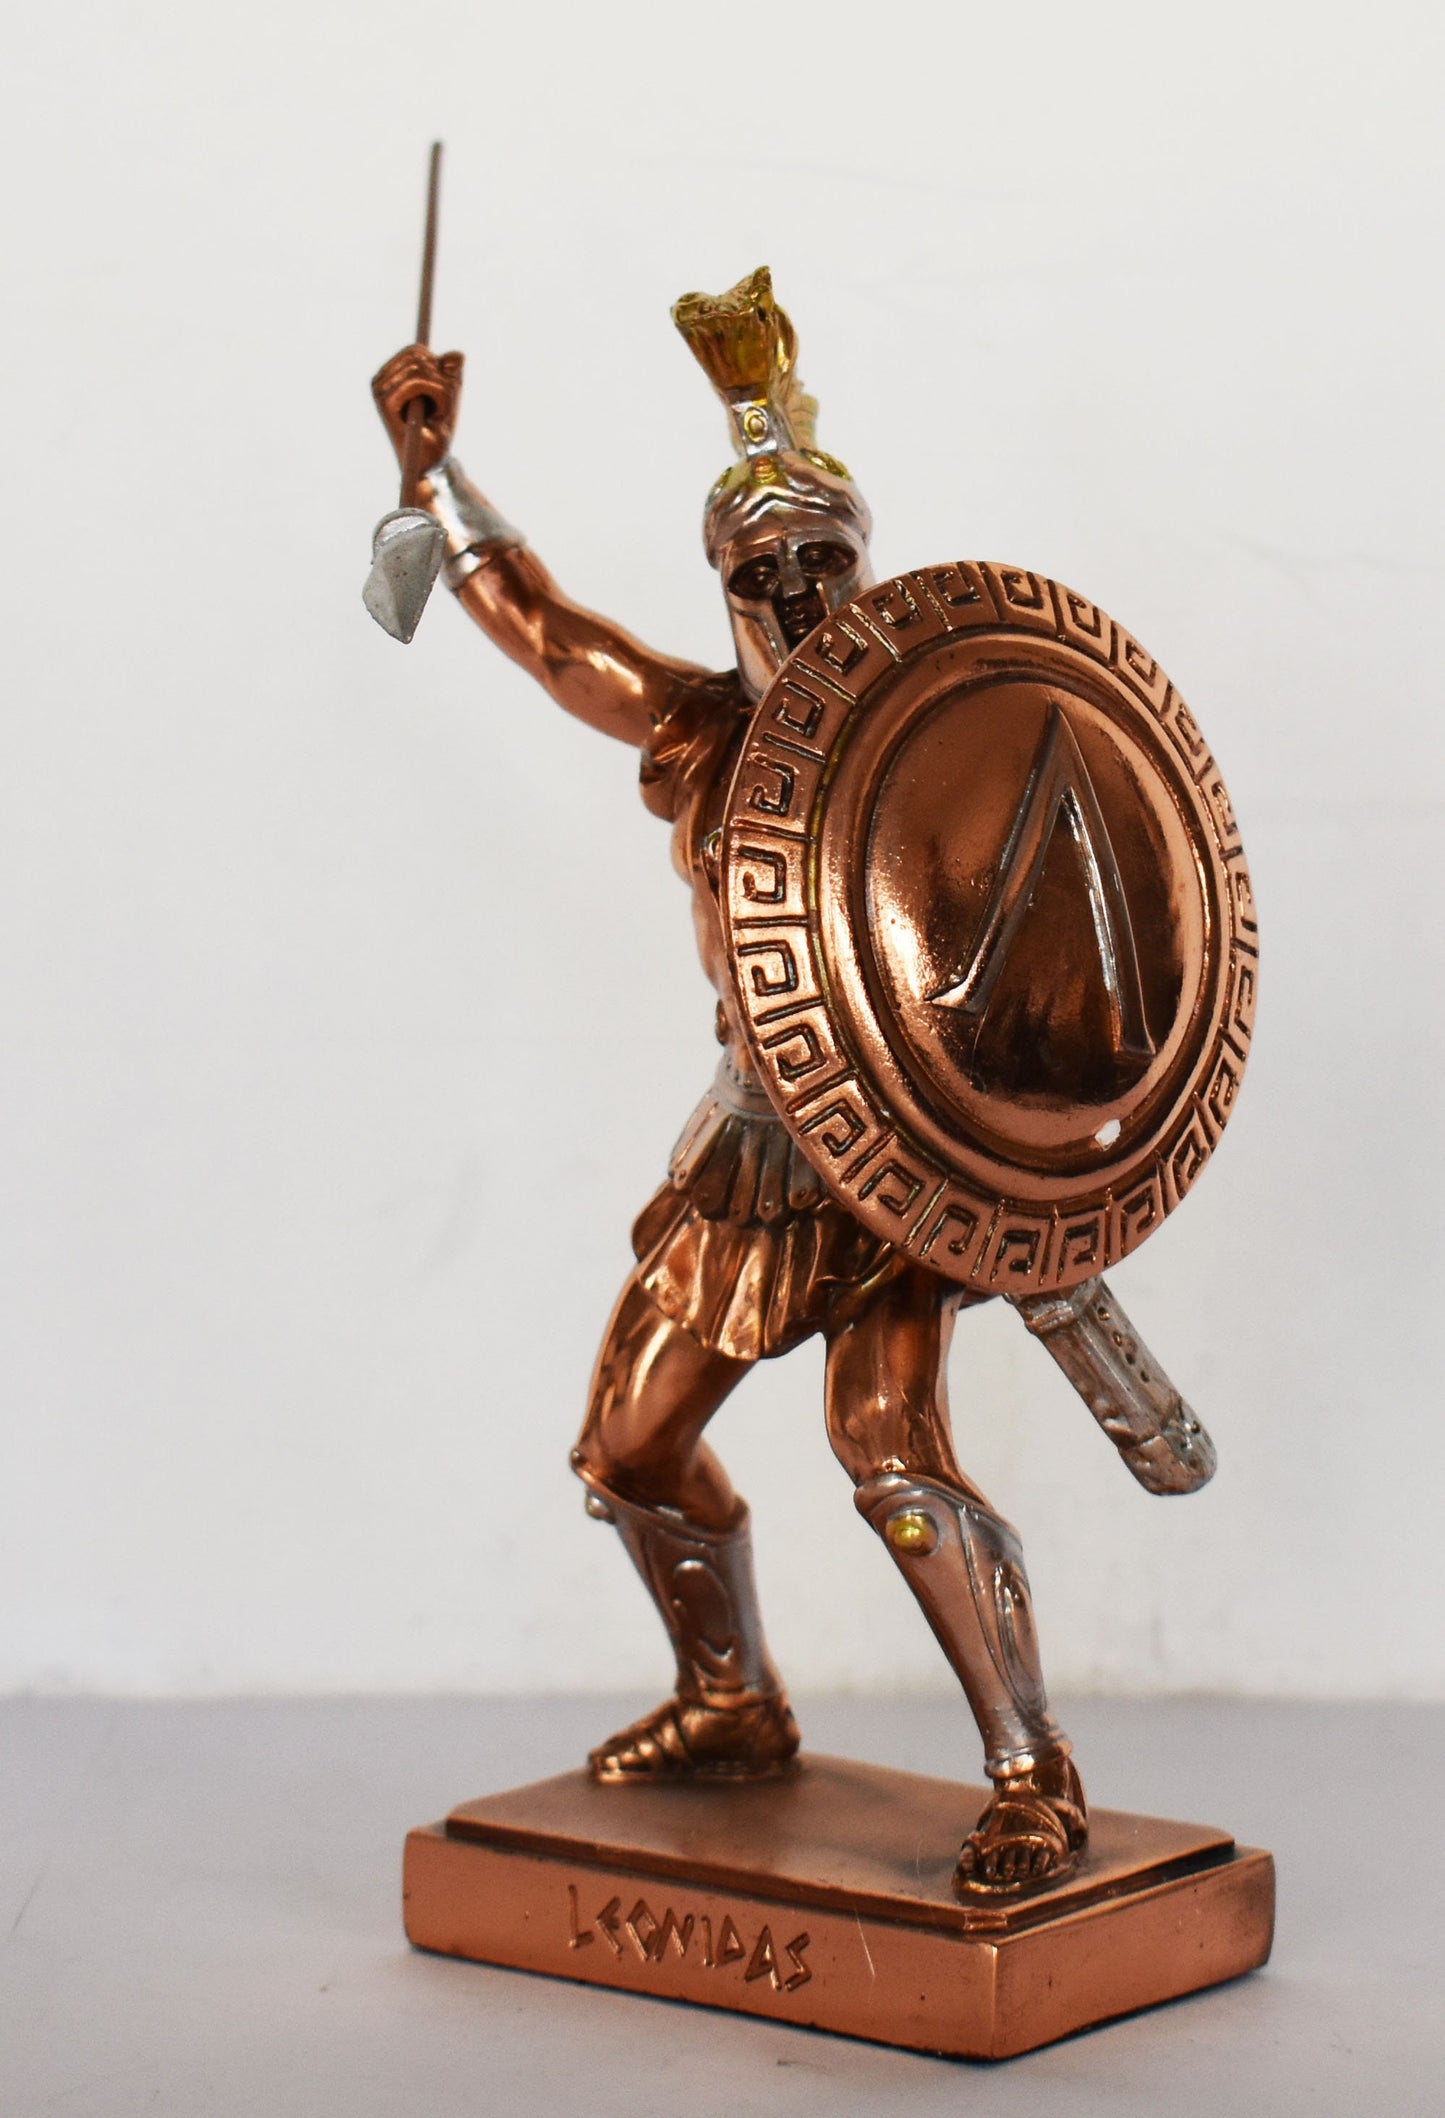 Leonidas - Spartan King - Leader of 300 - Battle of Thermopylae - 480 BC - Molon Labe, Come and Take Them - Copper Plated Alabaster